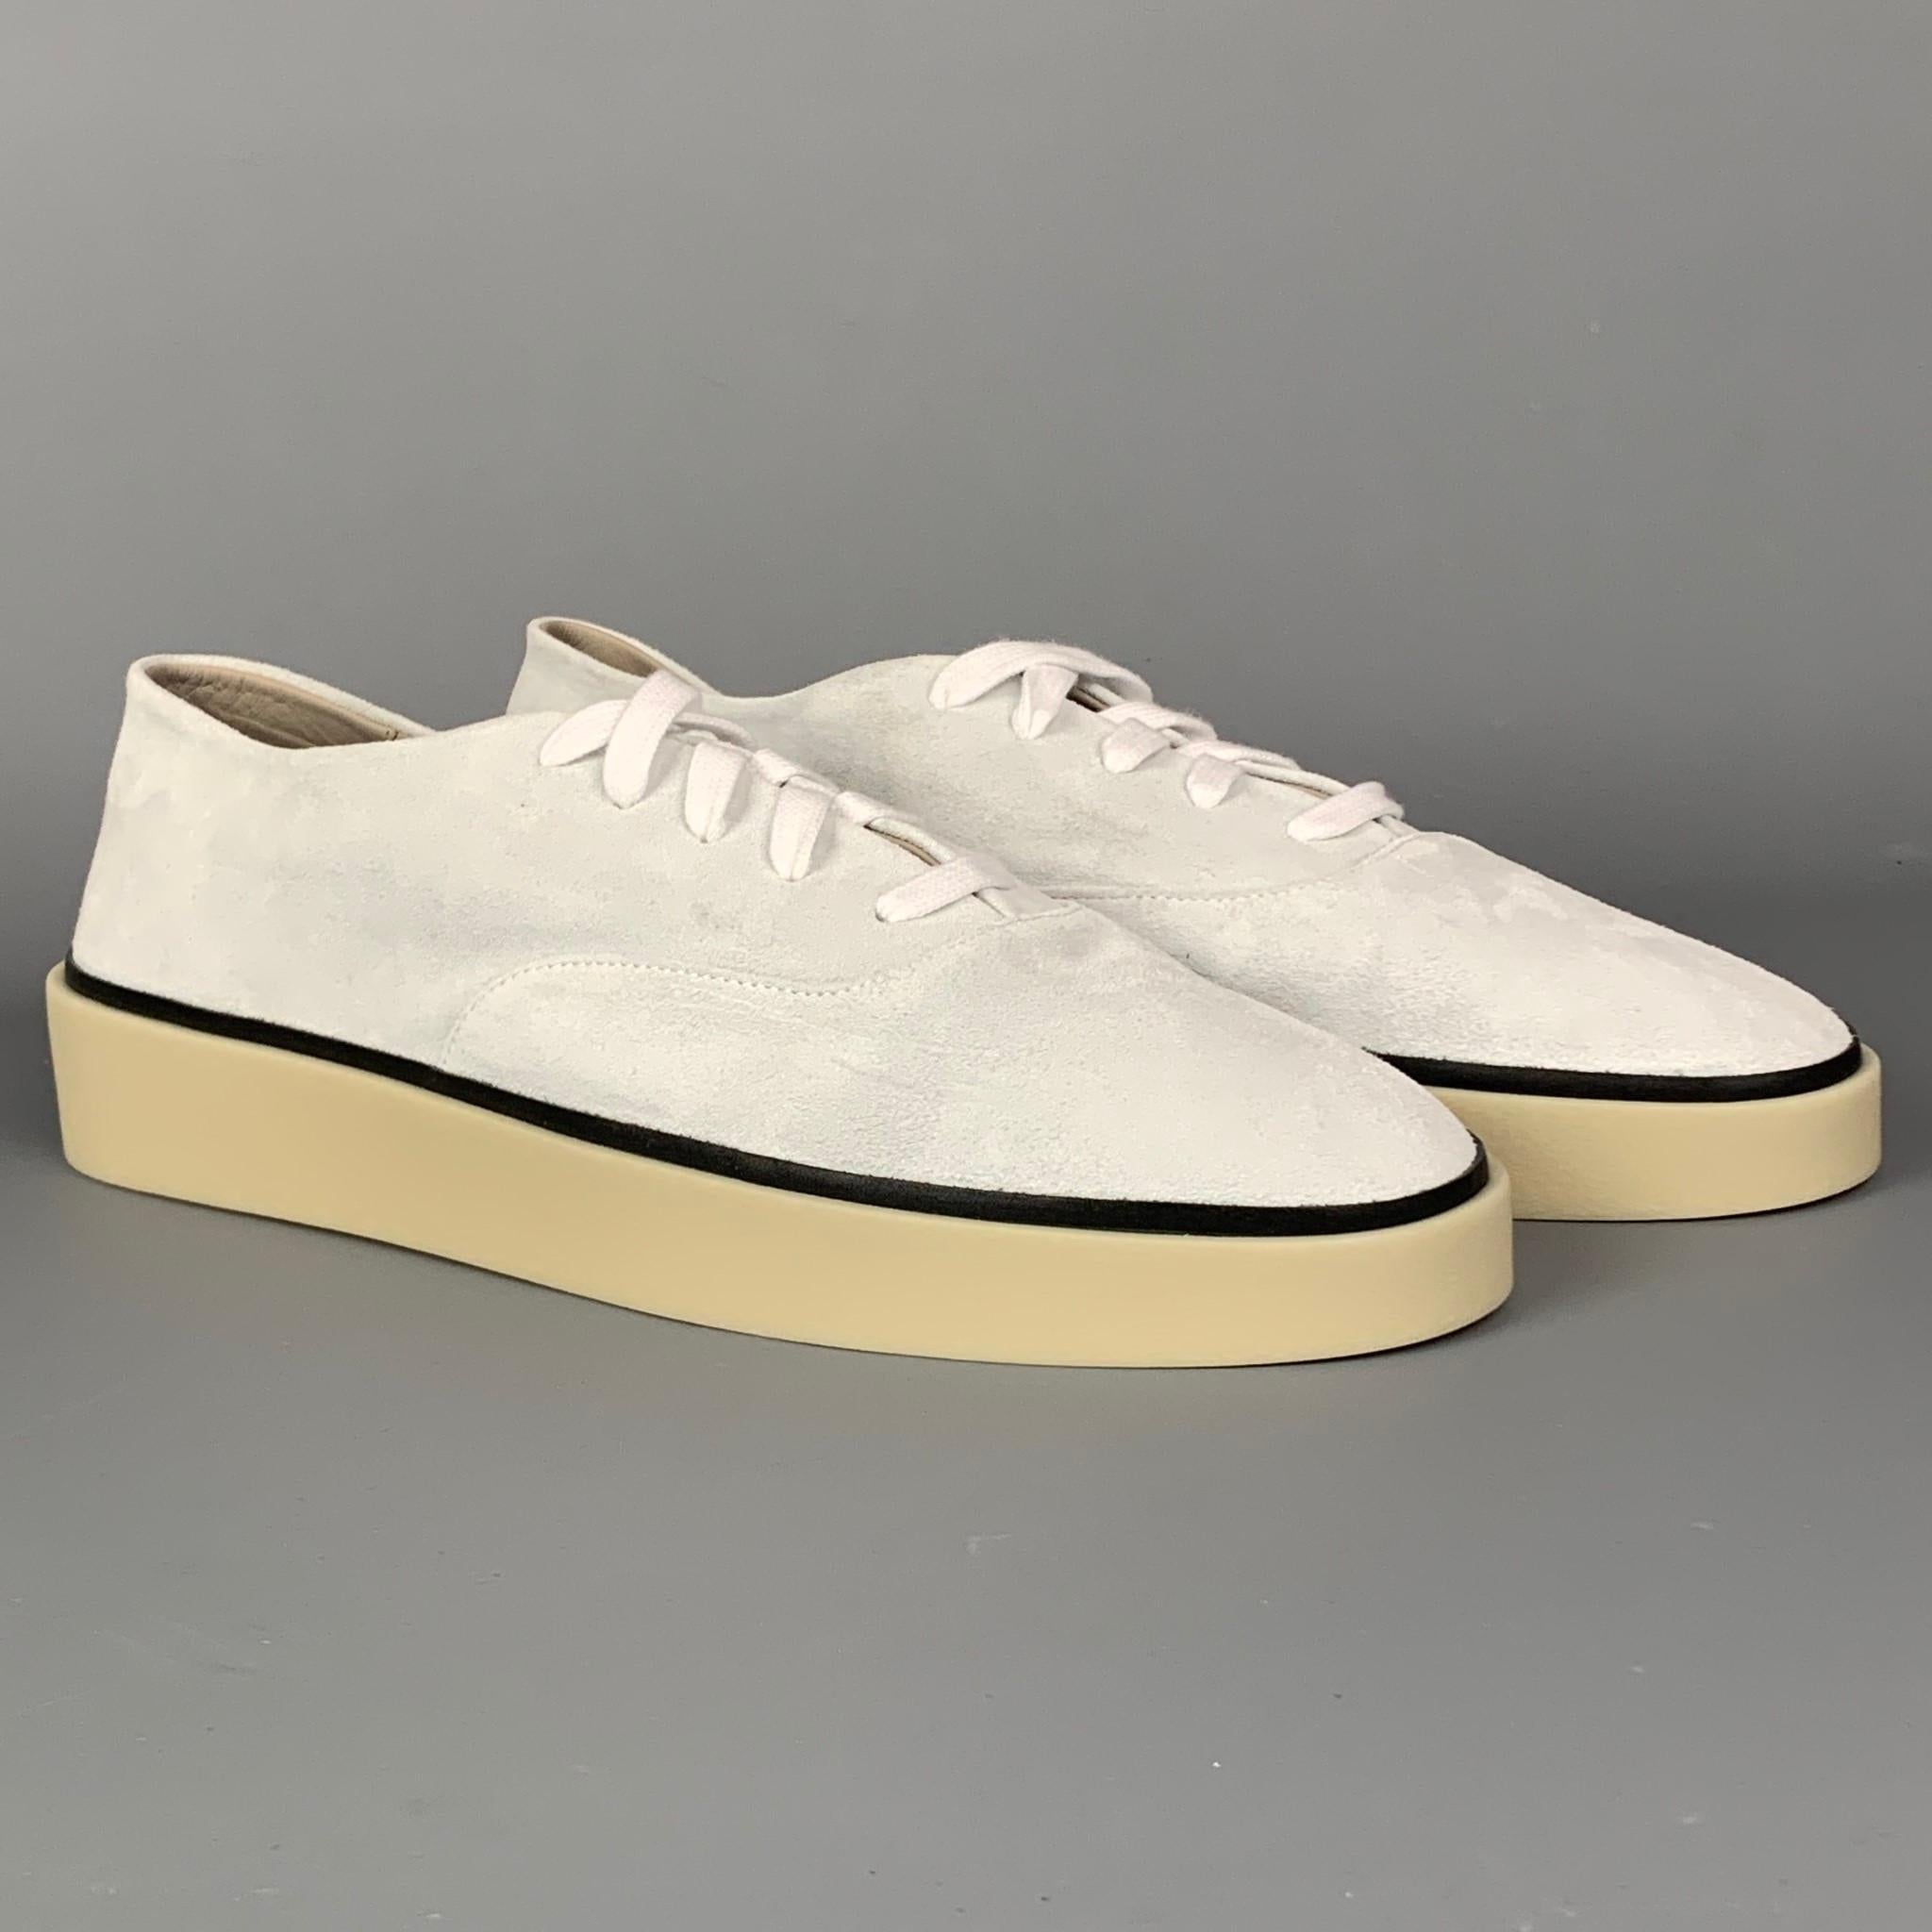 FEAR OF GOD for ERMENEGILDO ZEGNA sneakers comes in a off white suede with a black trim featuring a rubber sole and a lace up closure. Made in Italy.  Retail $595

Excellent Pre-Owned Condition.
Marked: A4794L 10EU 11US

Outsole: 
11.5 in. x 4 in.